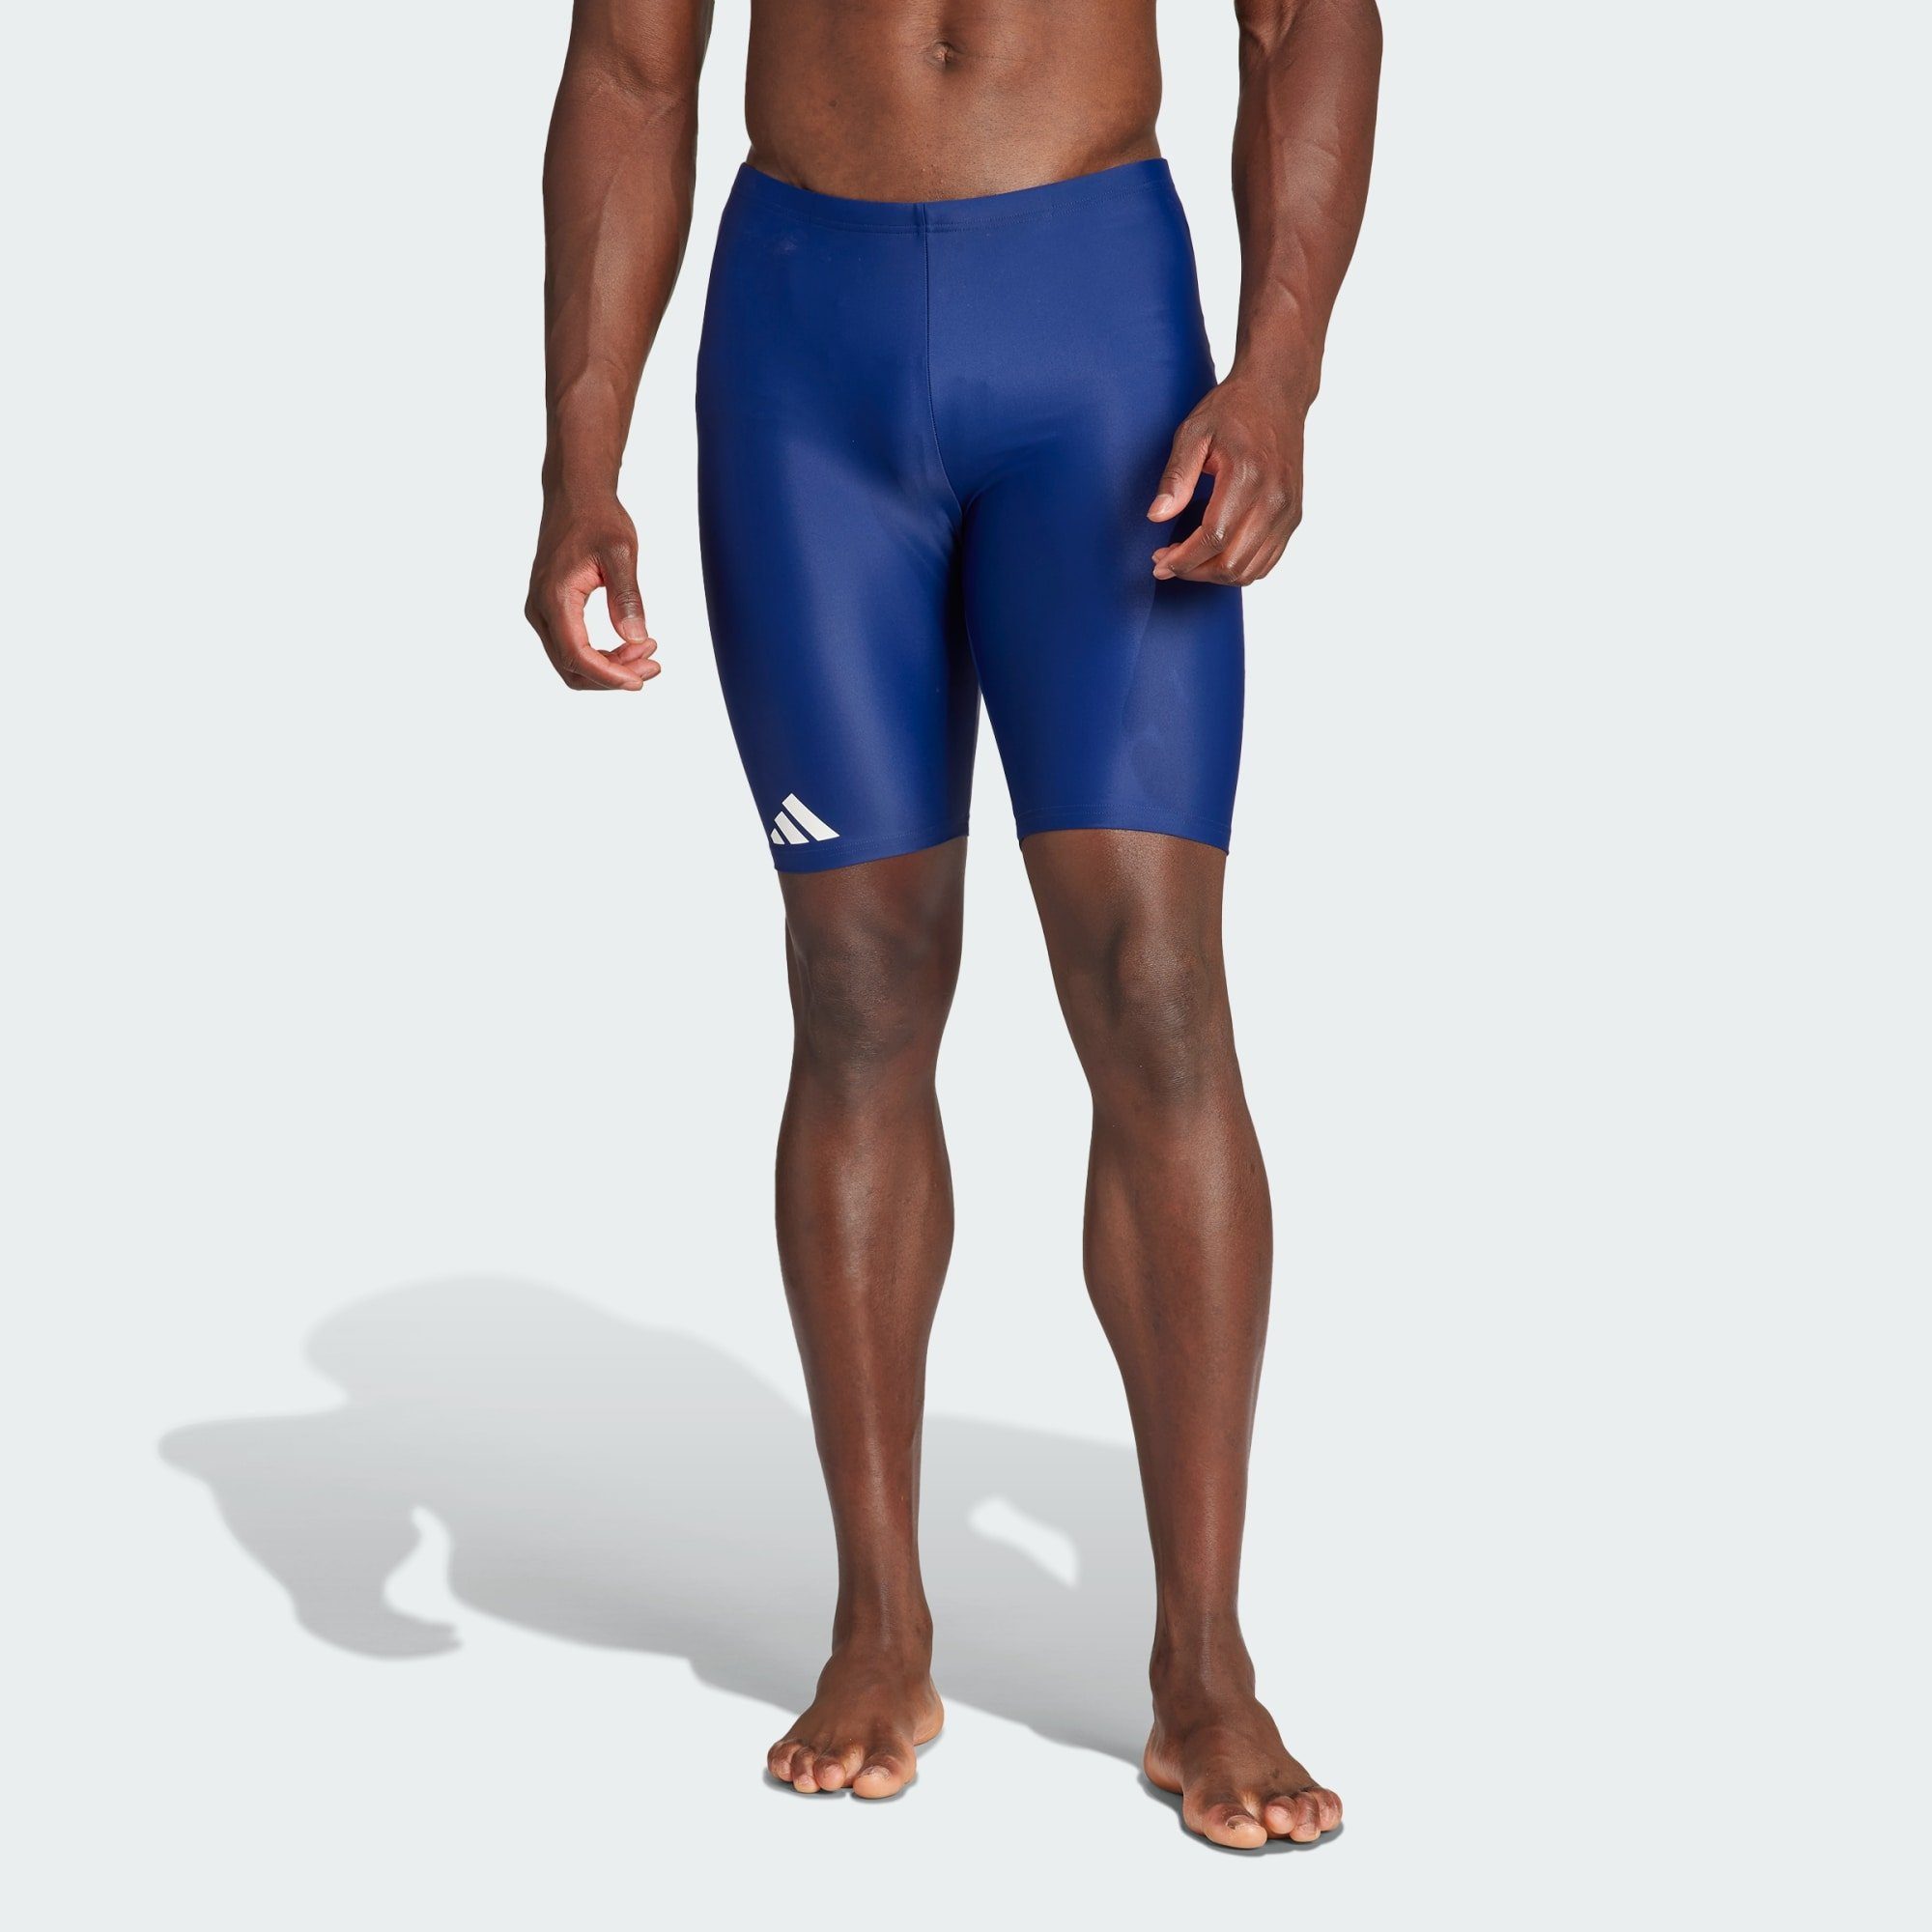 adidas Performance Funktionsshorts SOLID JAMMER-BADEHOSE